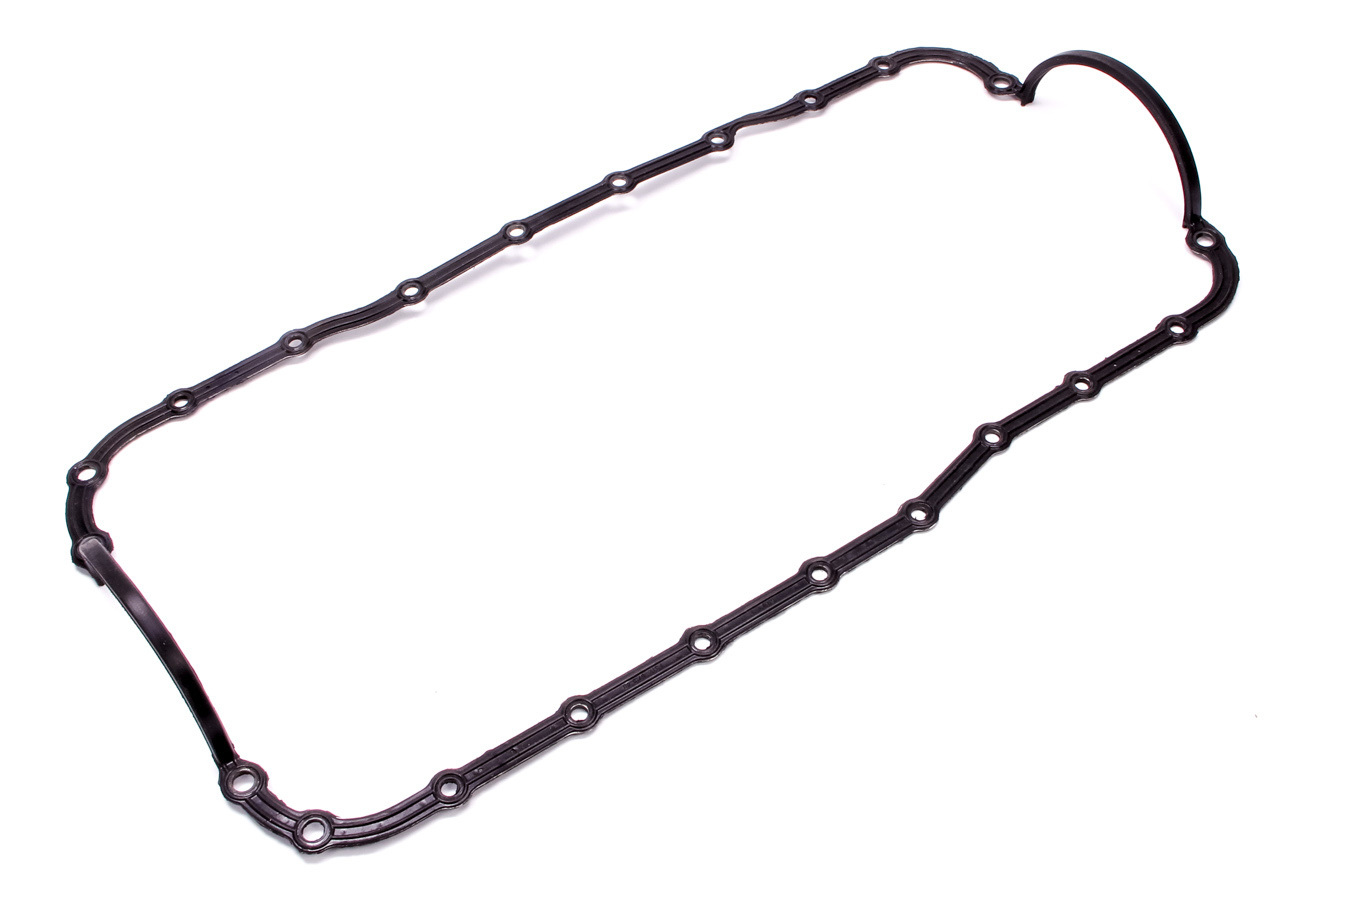 Ford Performance M6710-A50 Oil Pan Gasket, 1-Piece, Steel Core Silicone Rubber, Small Block Ford, Each